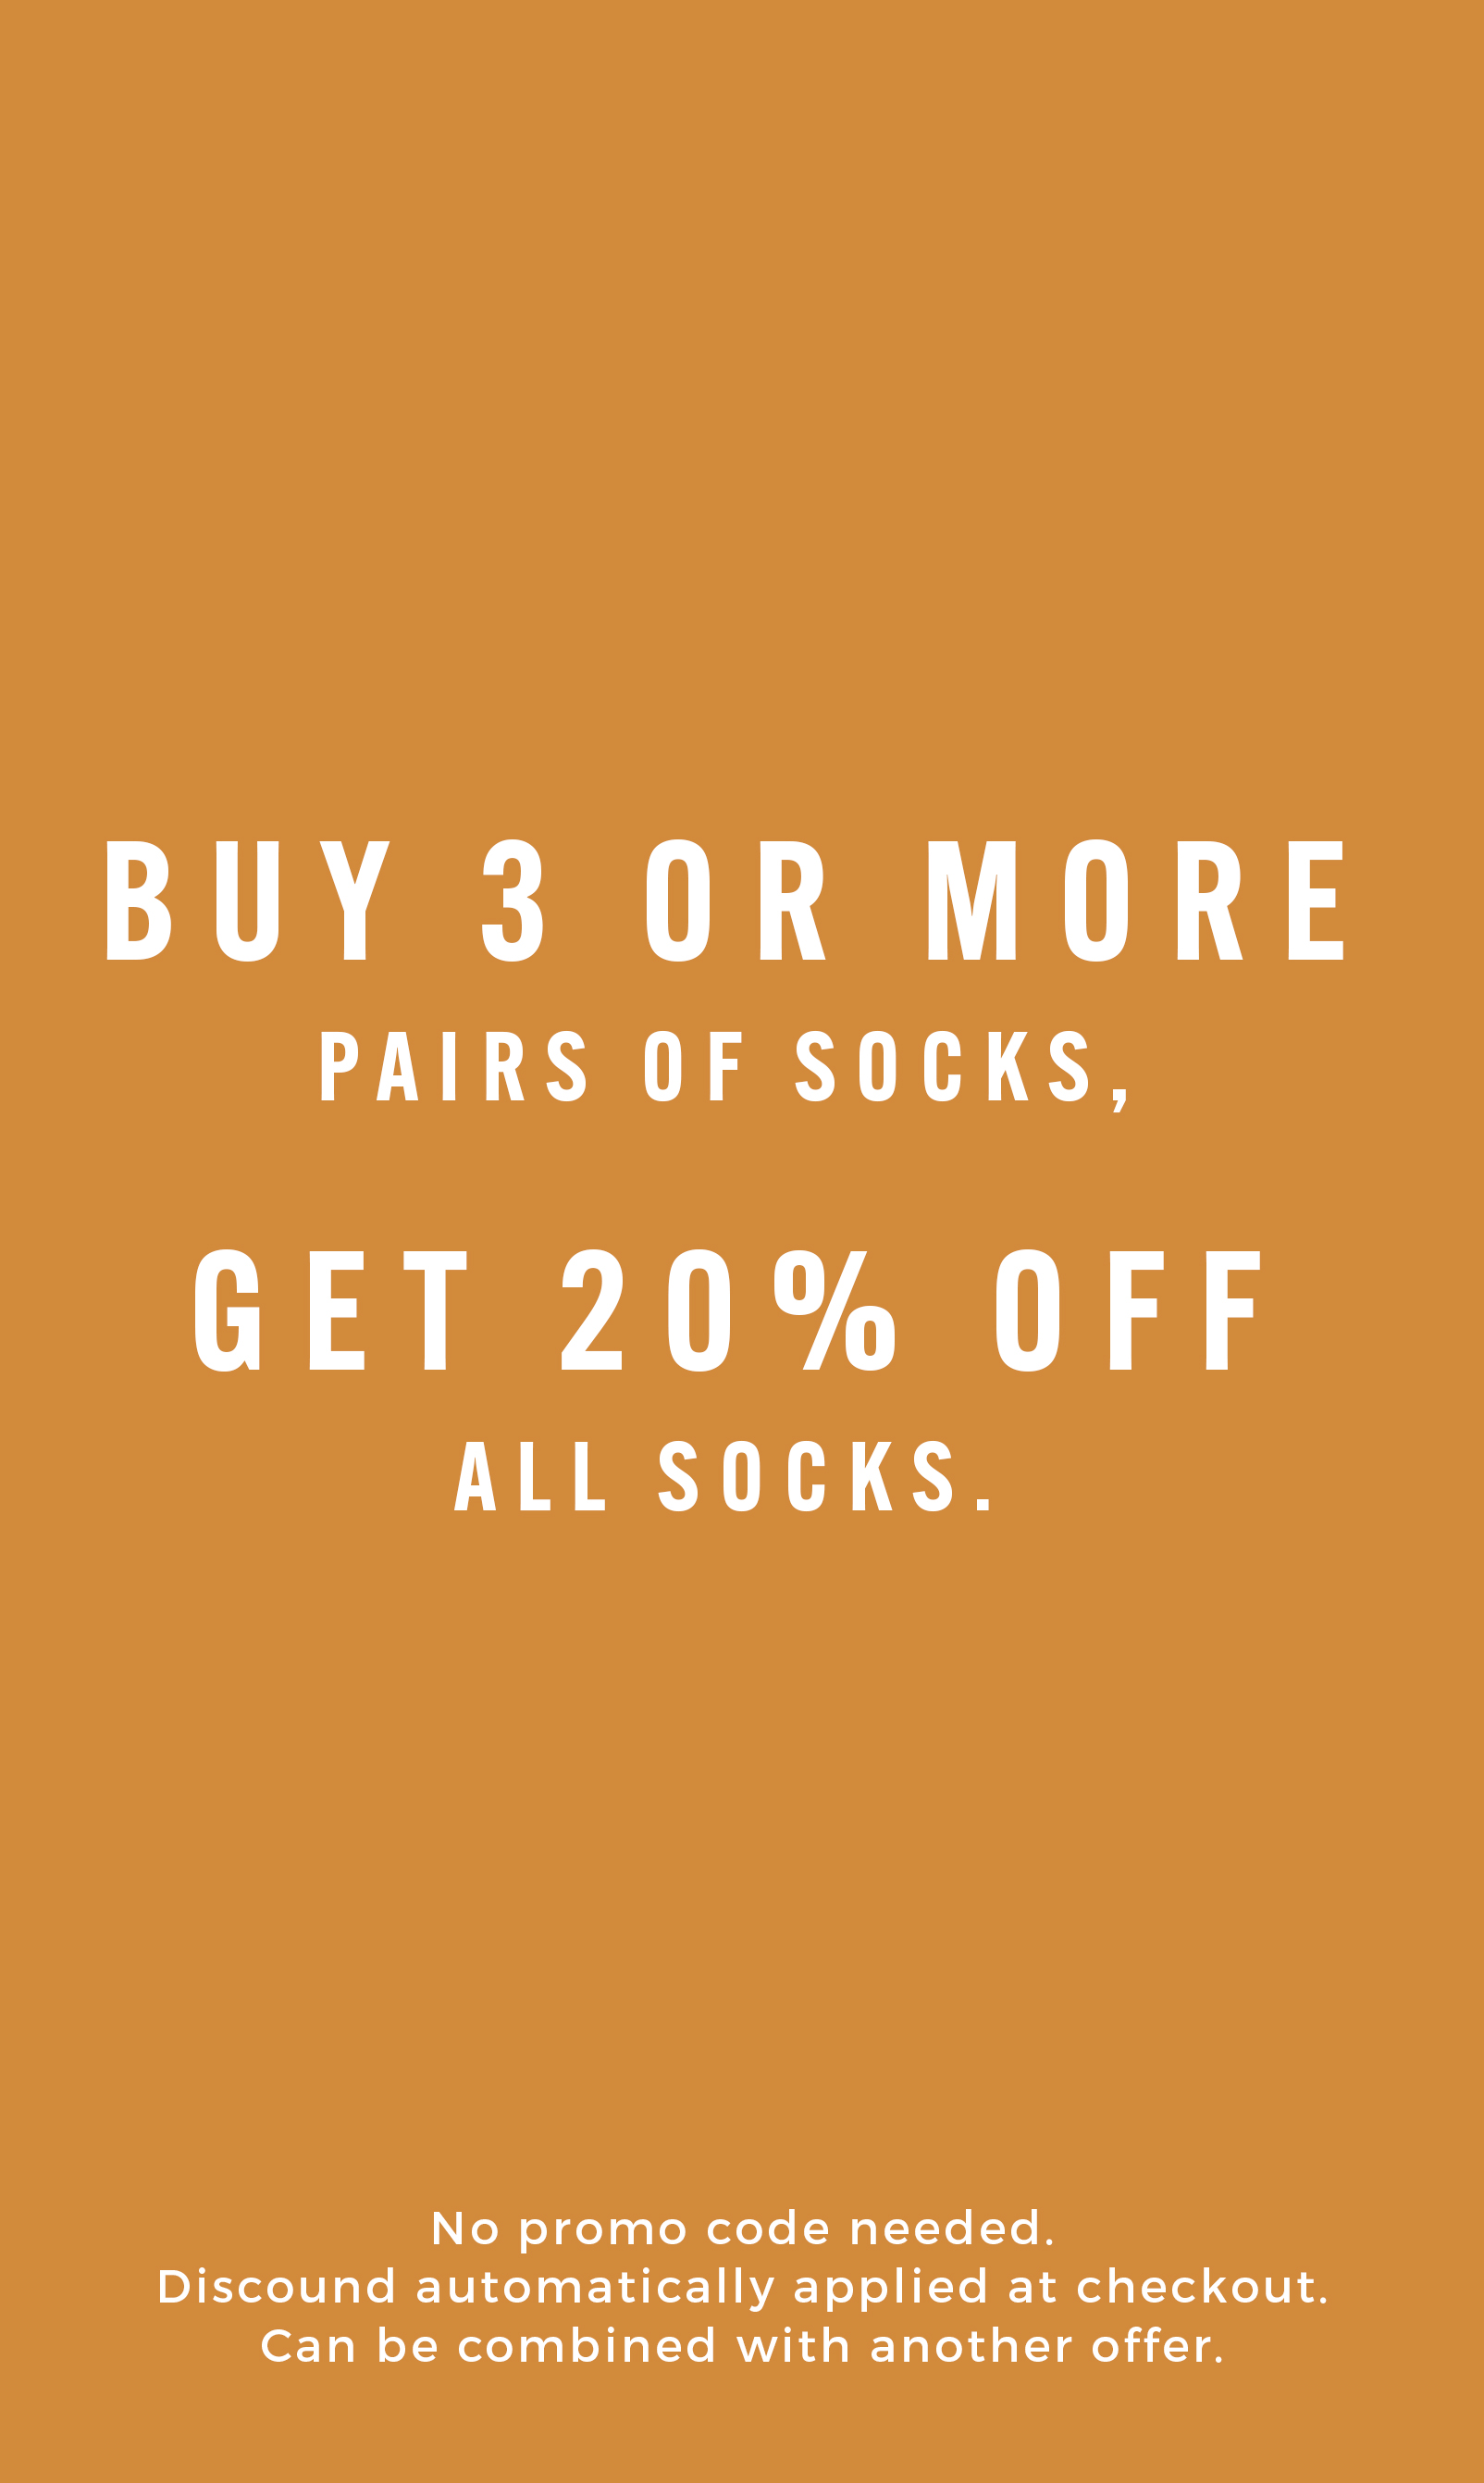 Men's Socks category. Buy 3 or more pairs of socks, get 20% off all socks. No promo code needed. The image features a pair of Florsheim socks. 